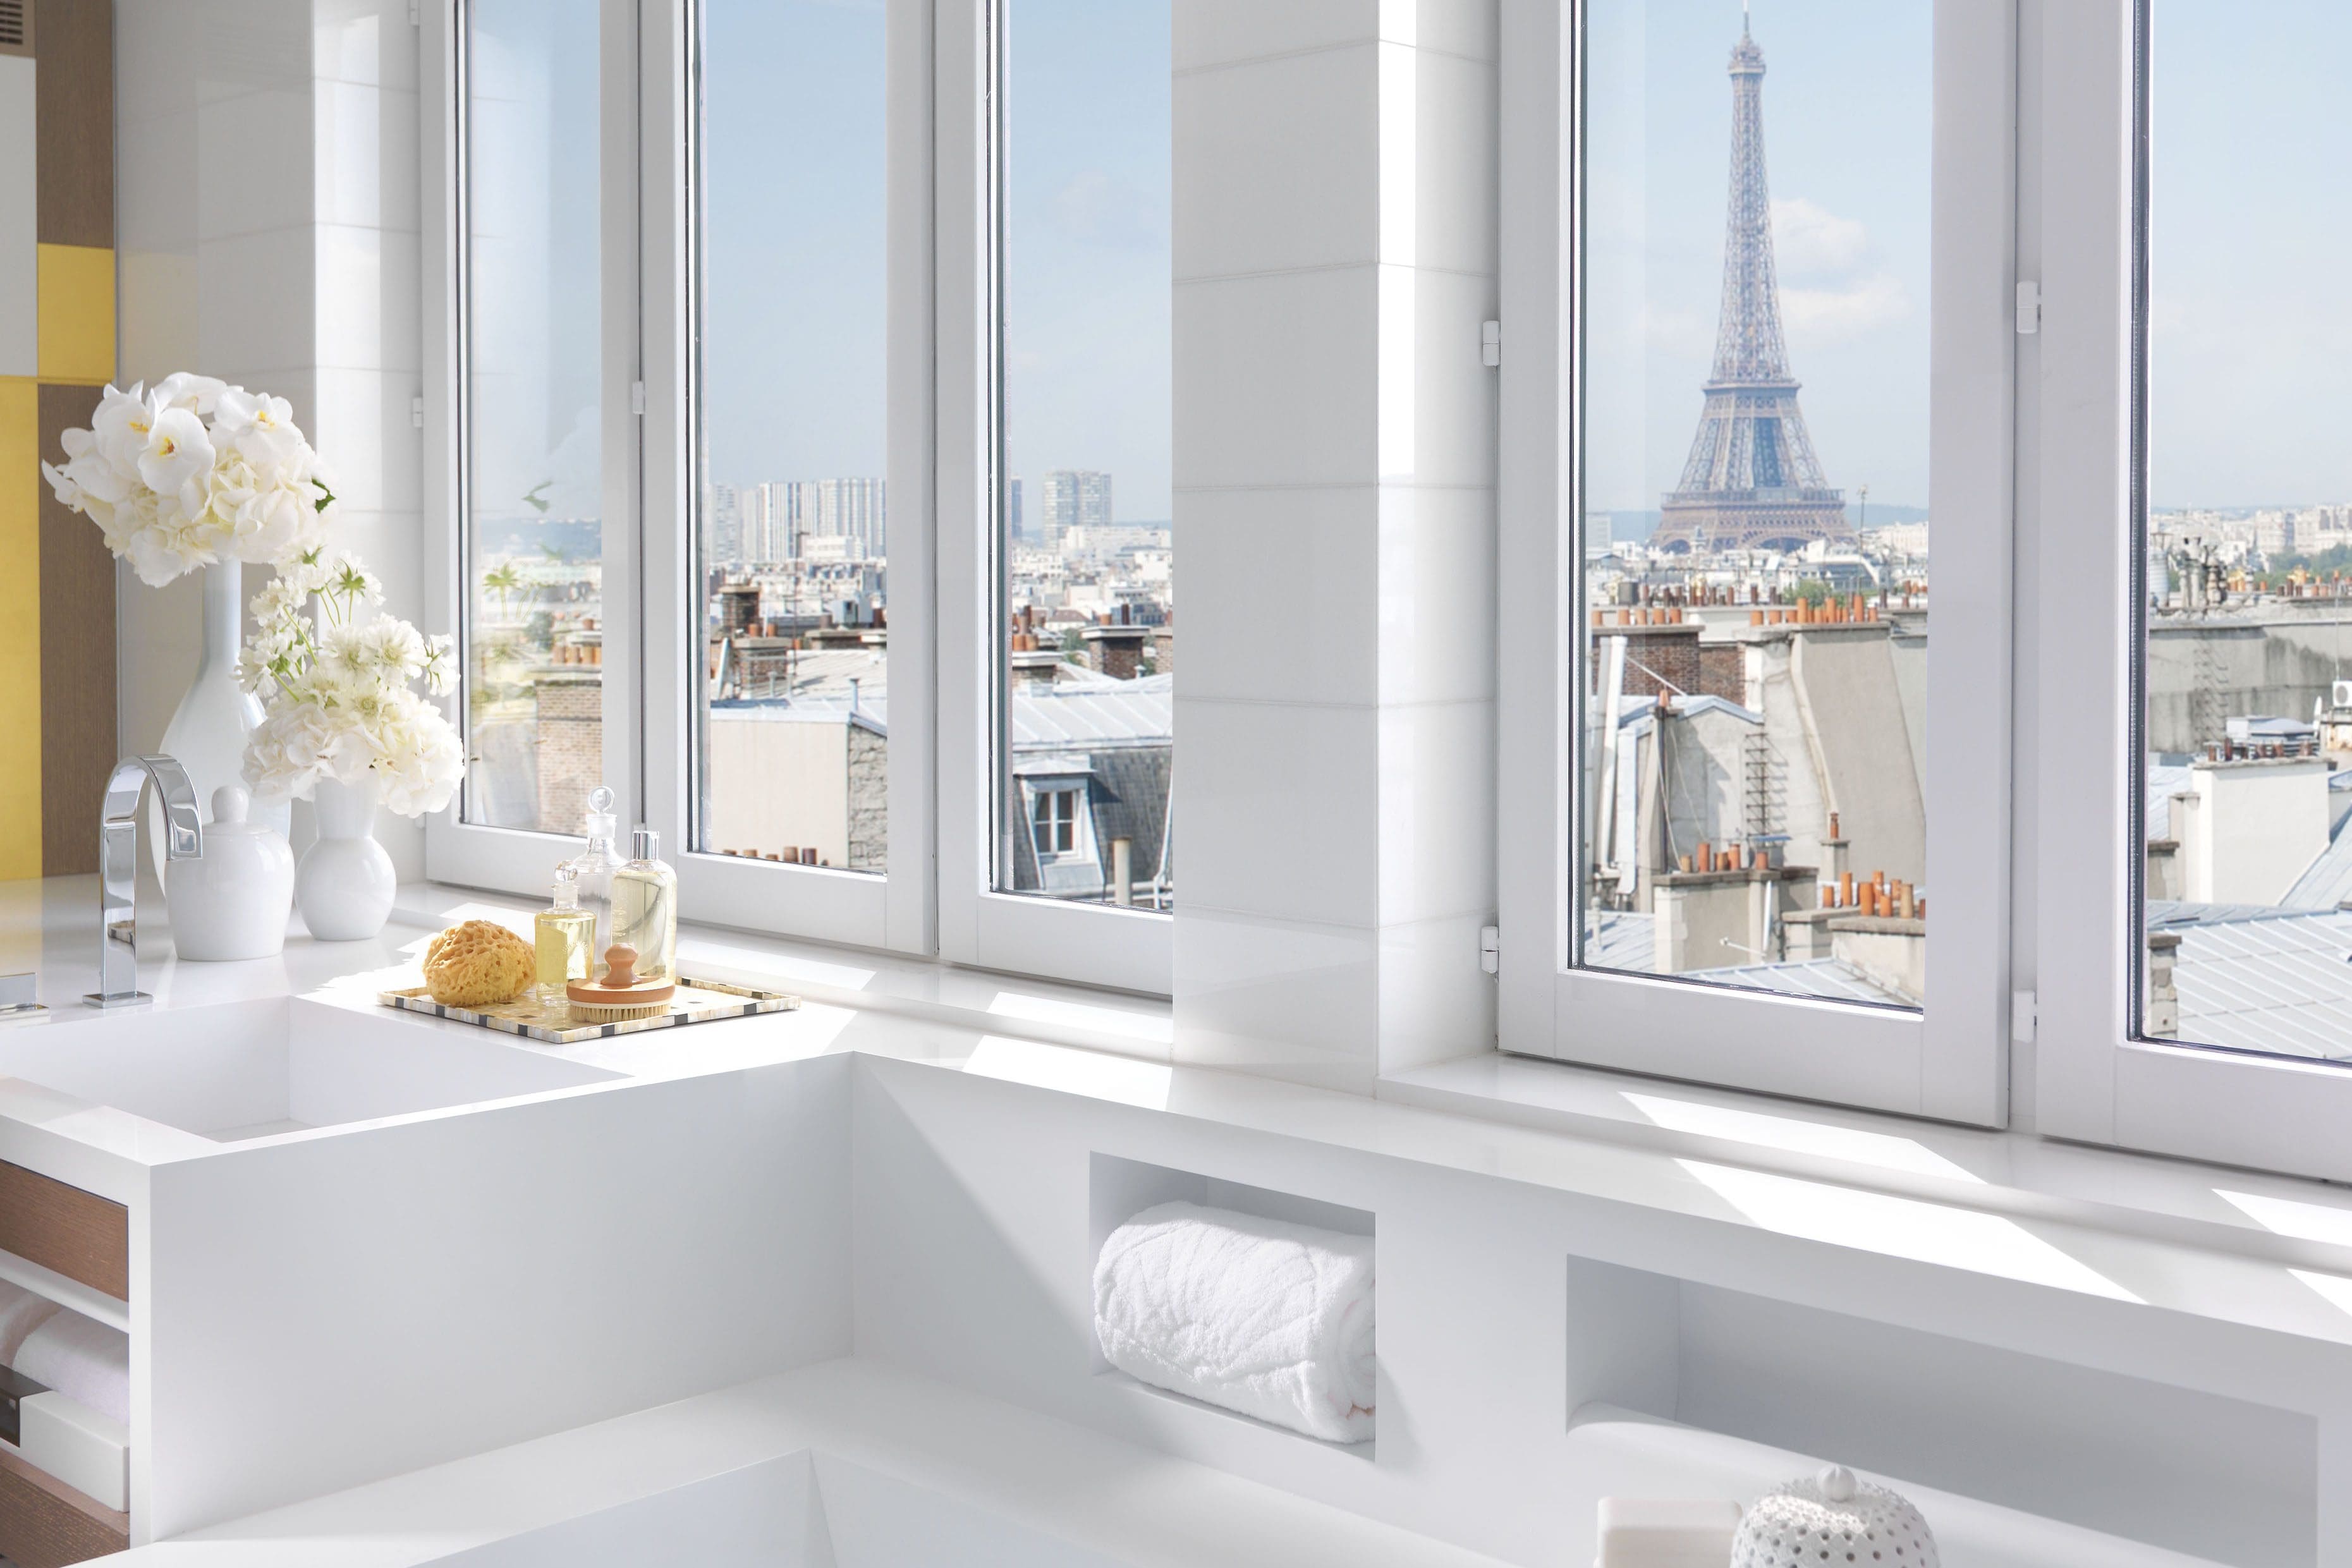 View of the Eiffel Tower from the bathroom at Mandarin Oriental Paris